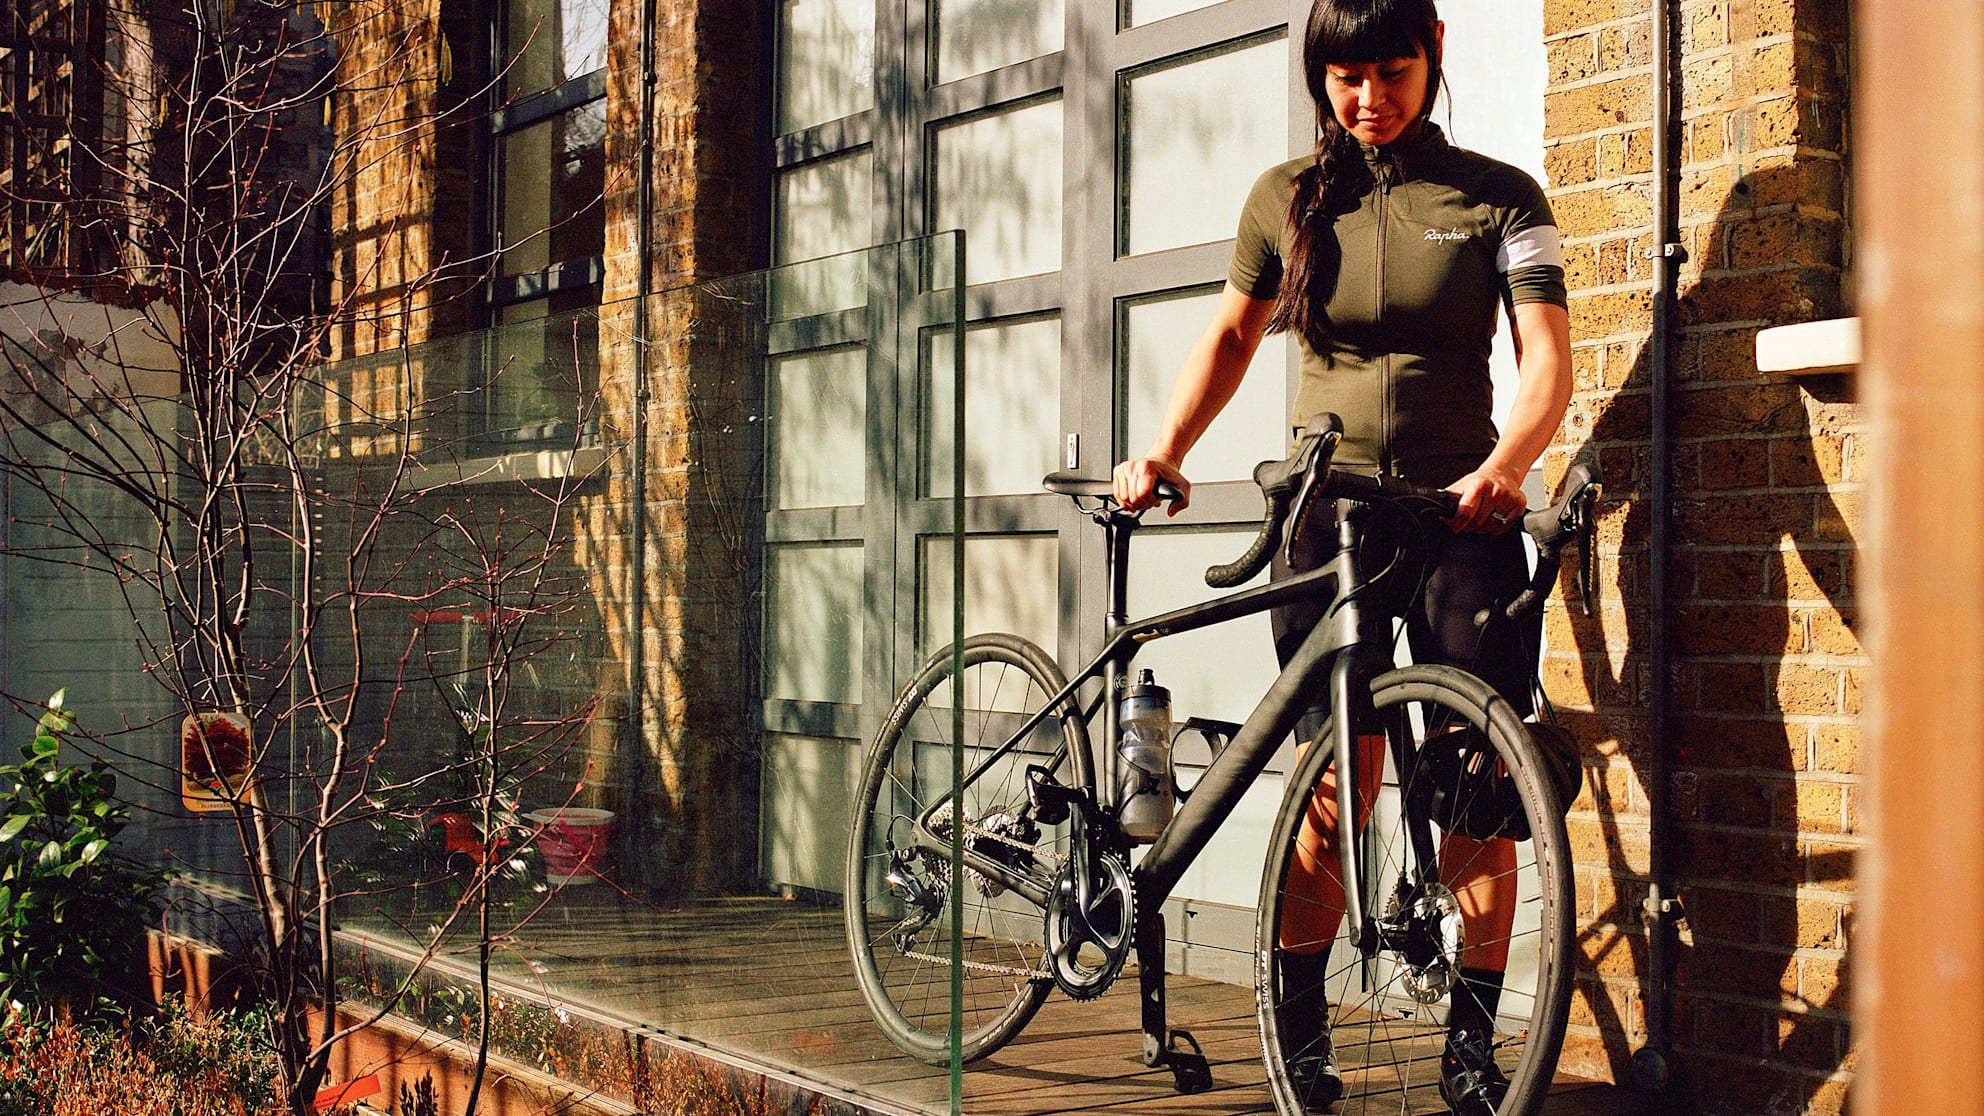 The World's Finest Cycling Clothing and Accessories.